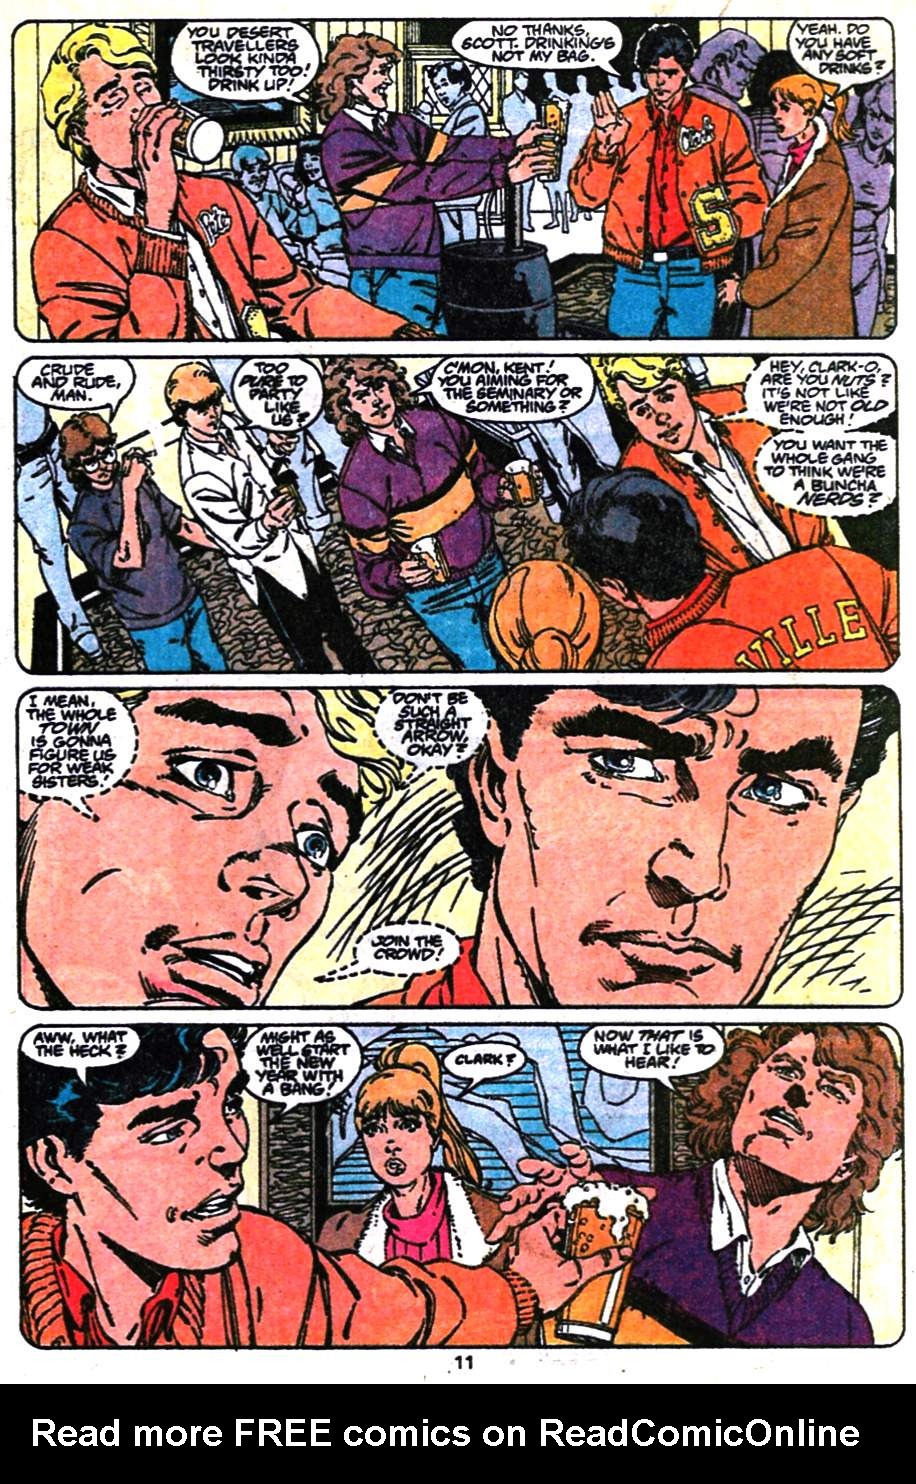 Adventures of Superman (1987) 474 Page 11